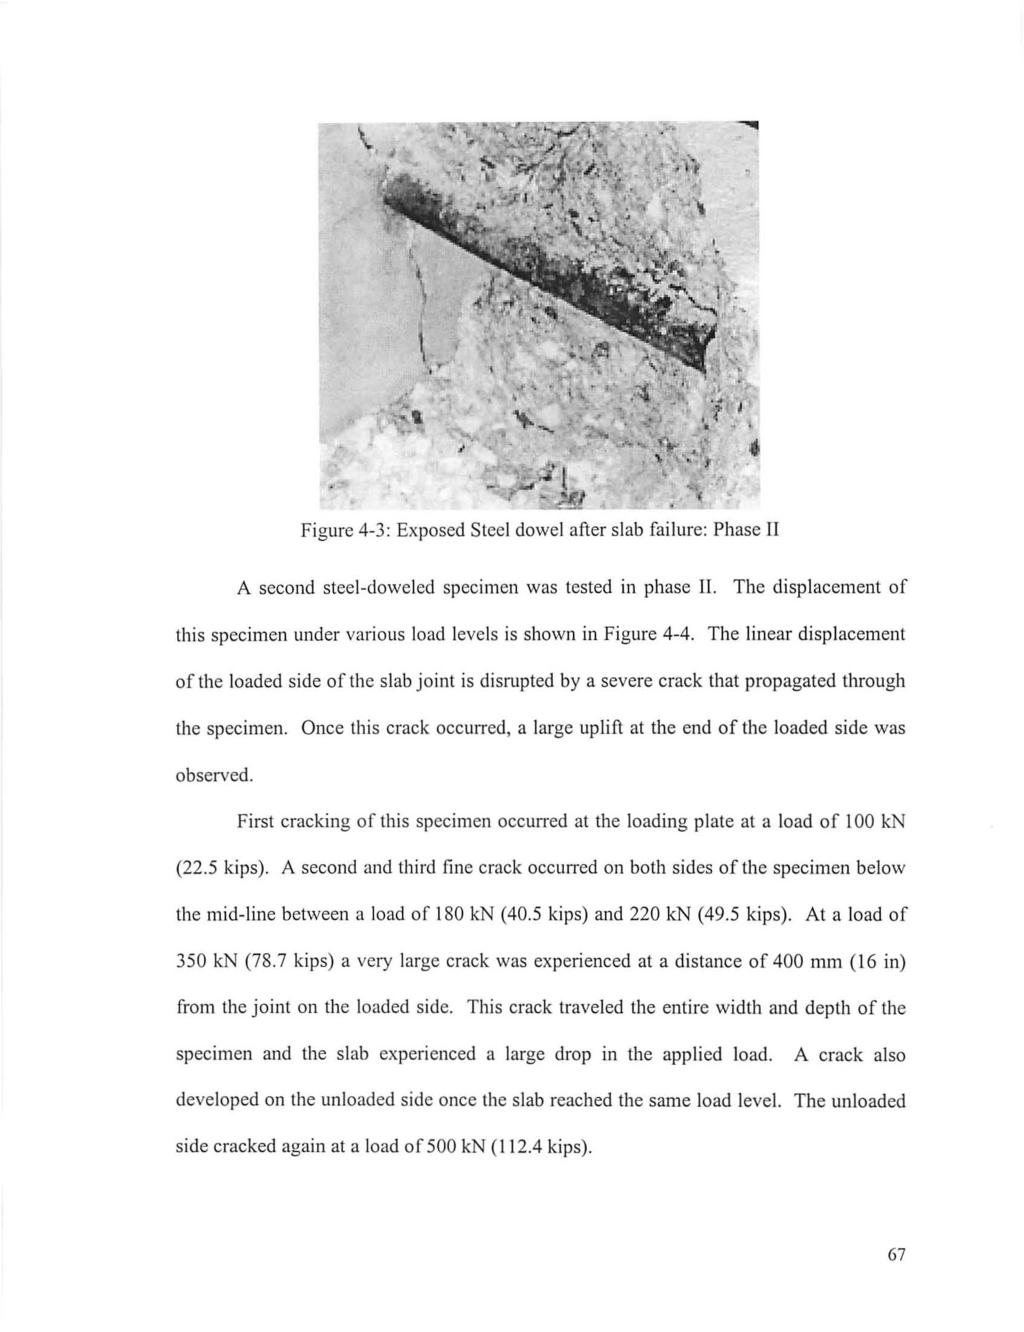 , Figure 4-3: Exposed Steel dowel after slab fai lure: Phase II A second steel-doweled specimen was tested in phase II.